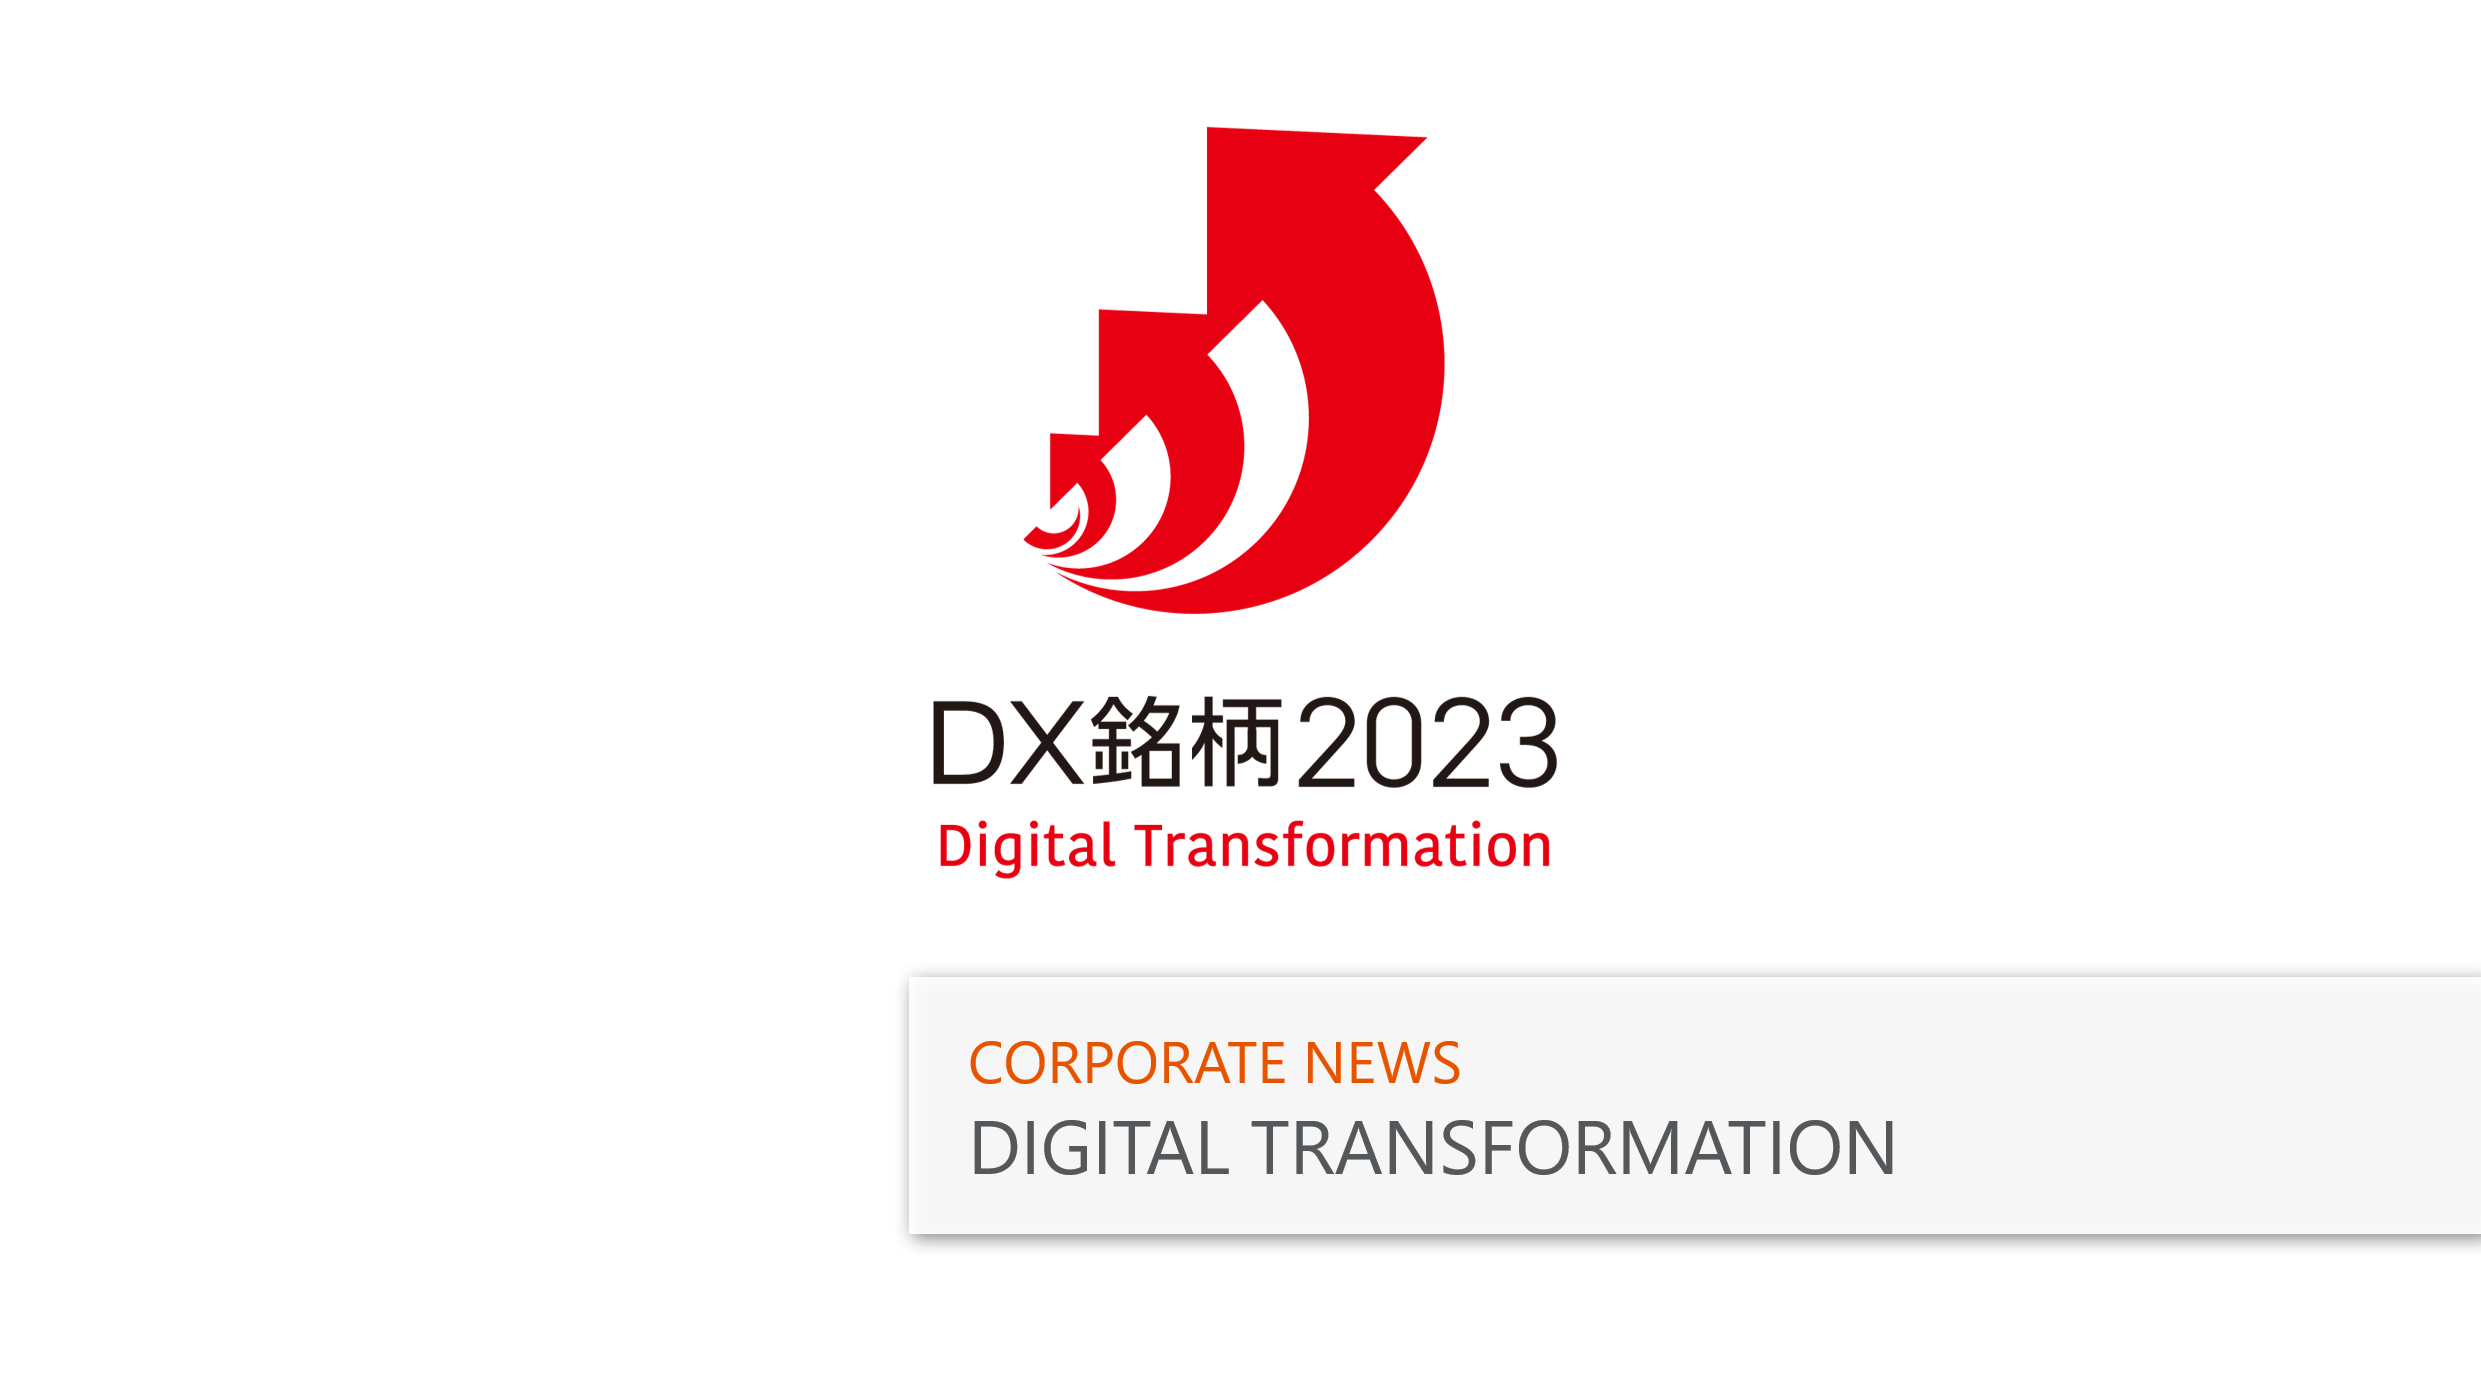 LIXIL、昨年に続き「DX銘柄2023」に選定 サムネイル画像